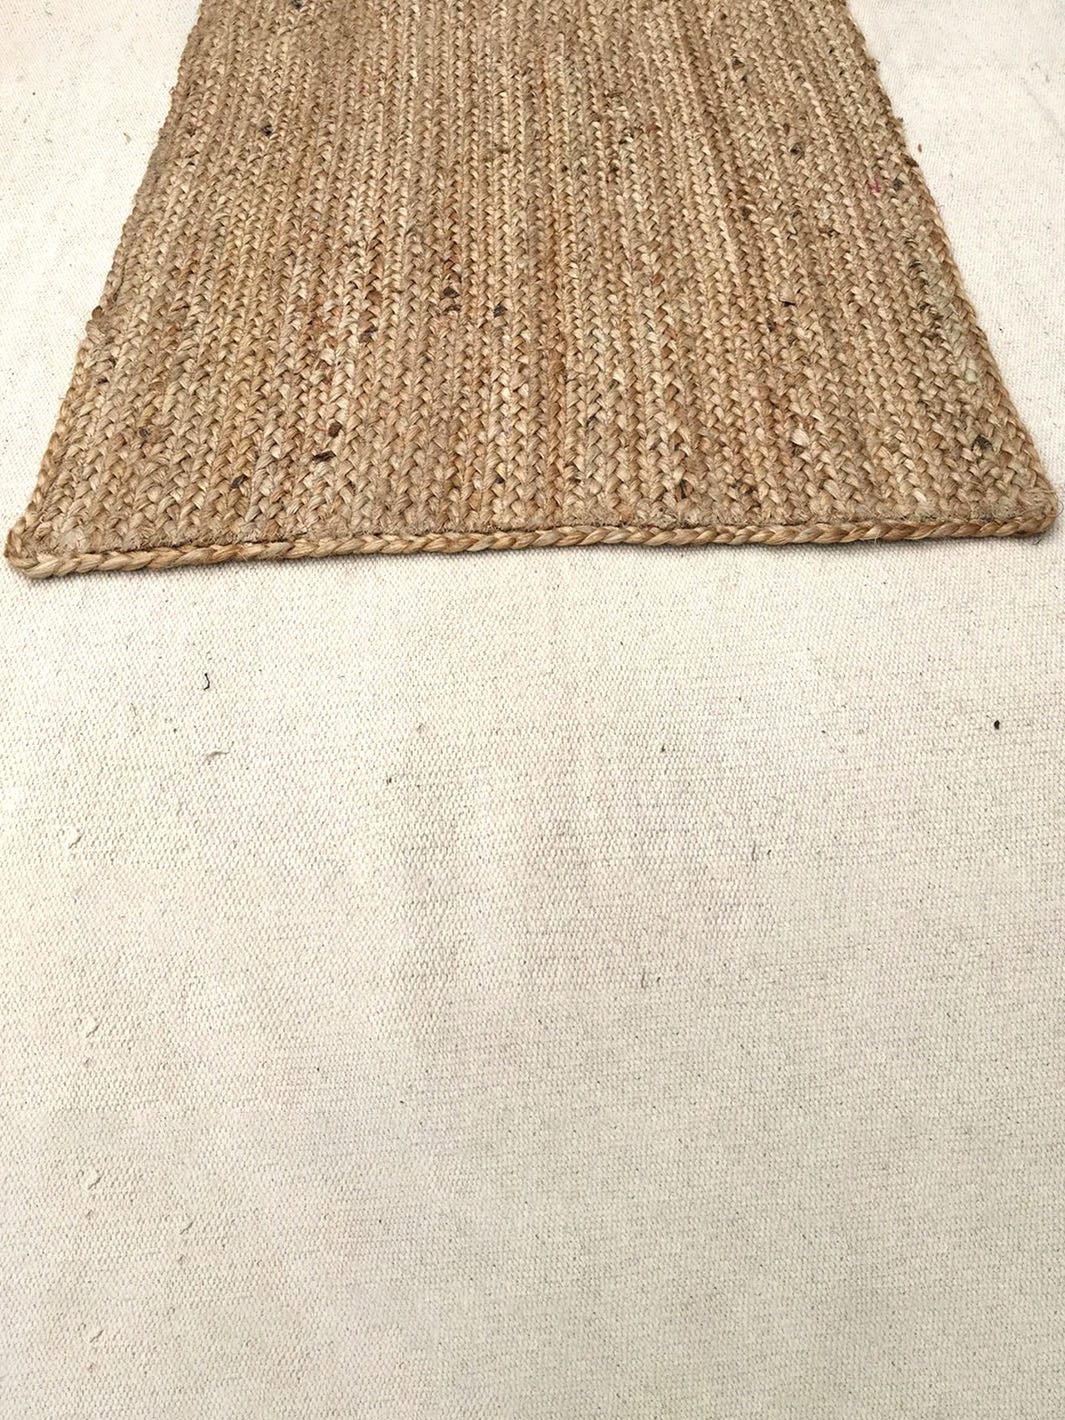 Handcrafted Braided Square Jute Rug Chouhan Rugs CRH0219-8